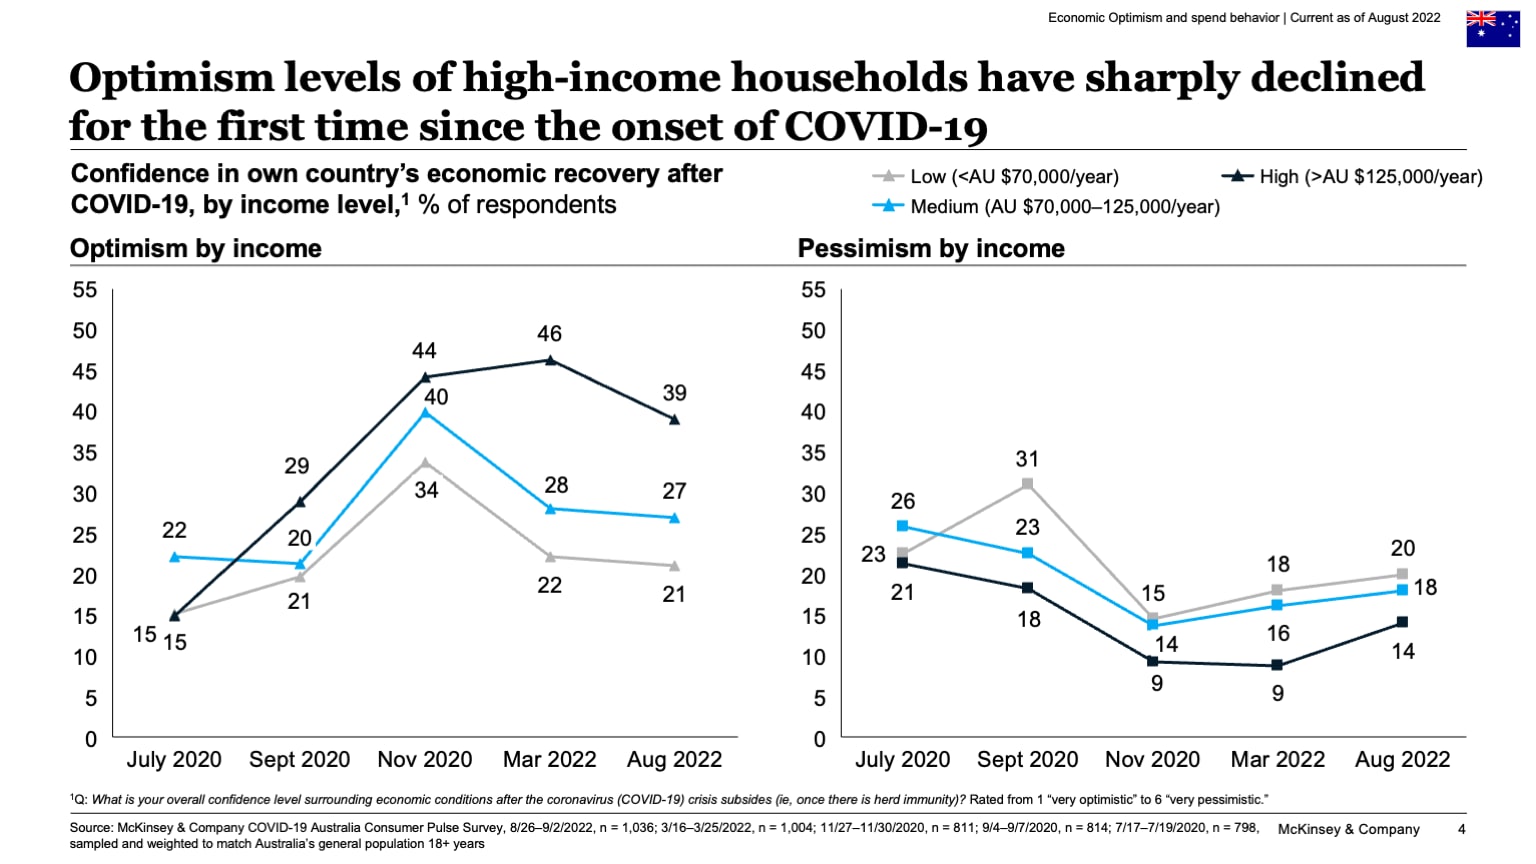 Optimism levels of high-income households have sharply declined for the first time since the onset of COVID-19